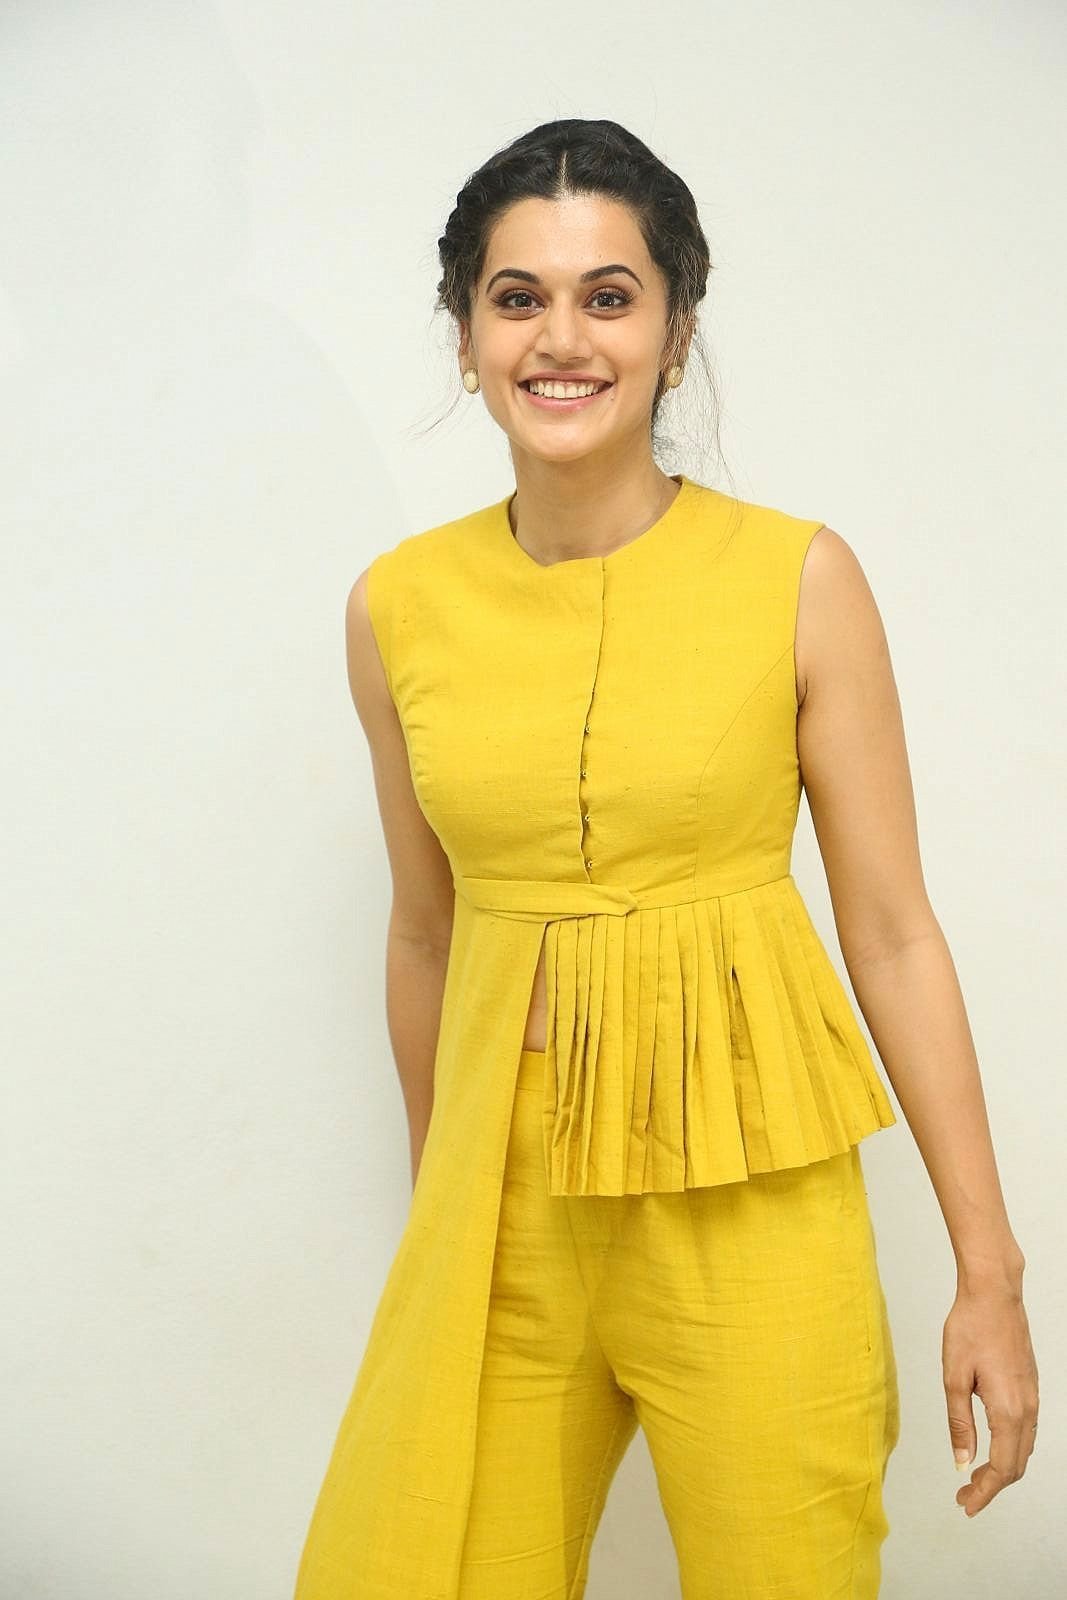 Taapsee Pannu at Anando Brahma Movie Motion Poster Launch Photos | Picture 1500584